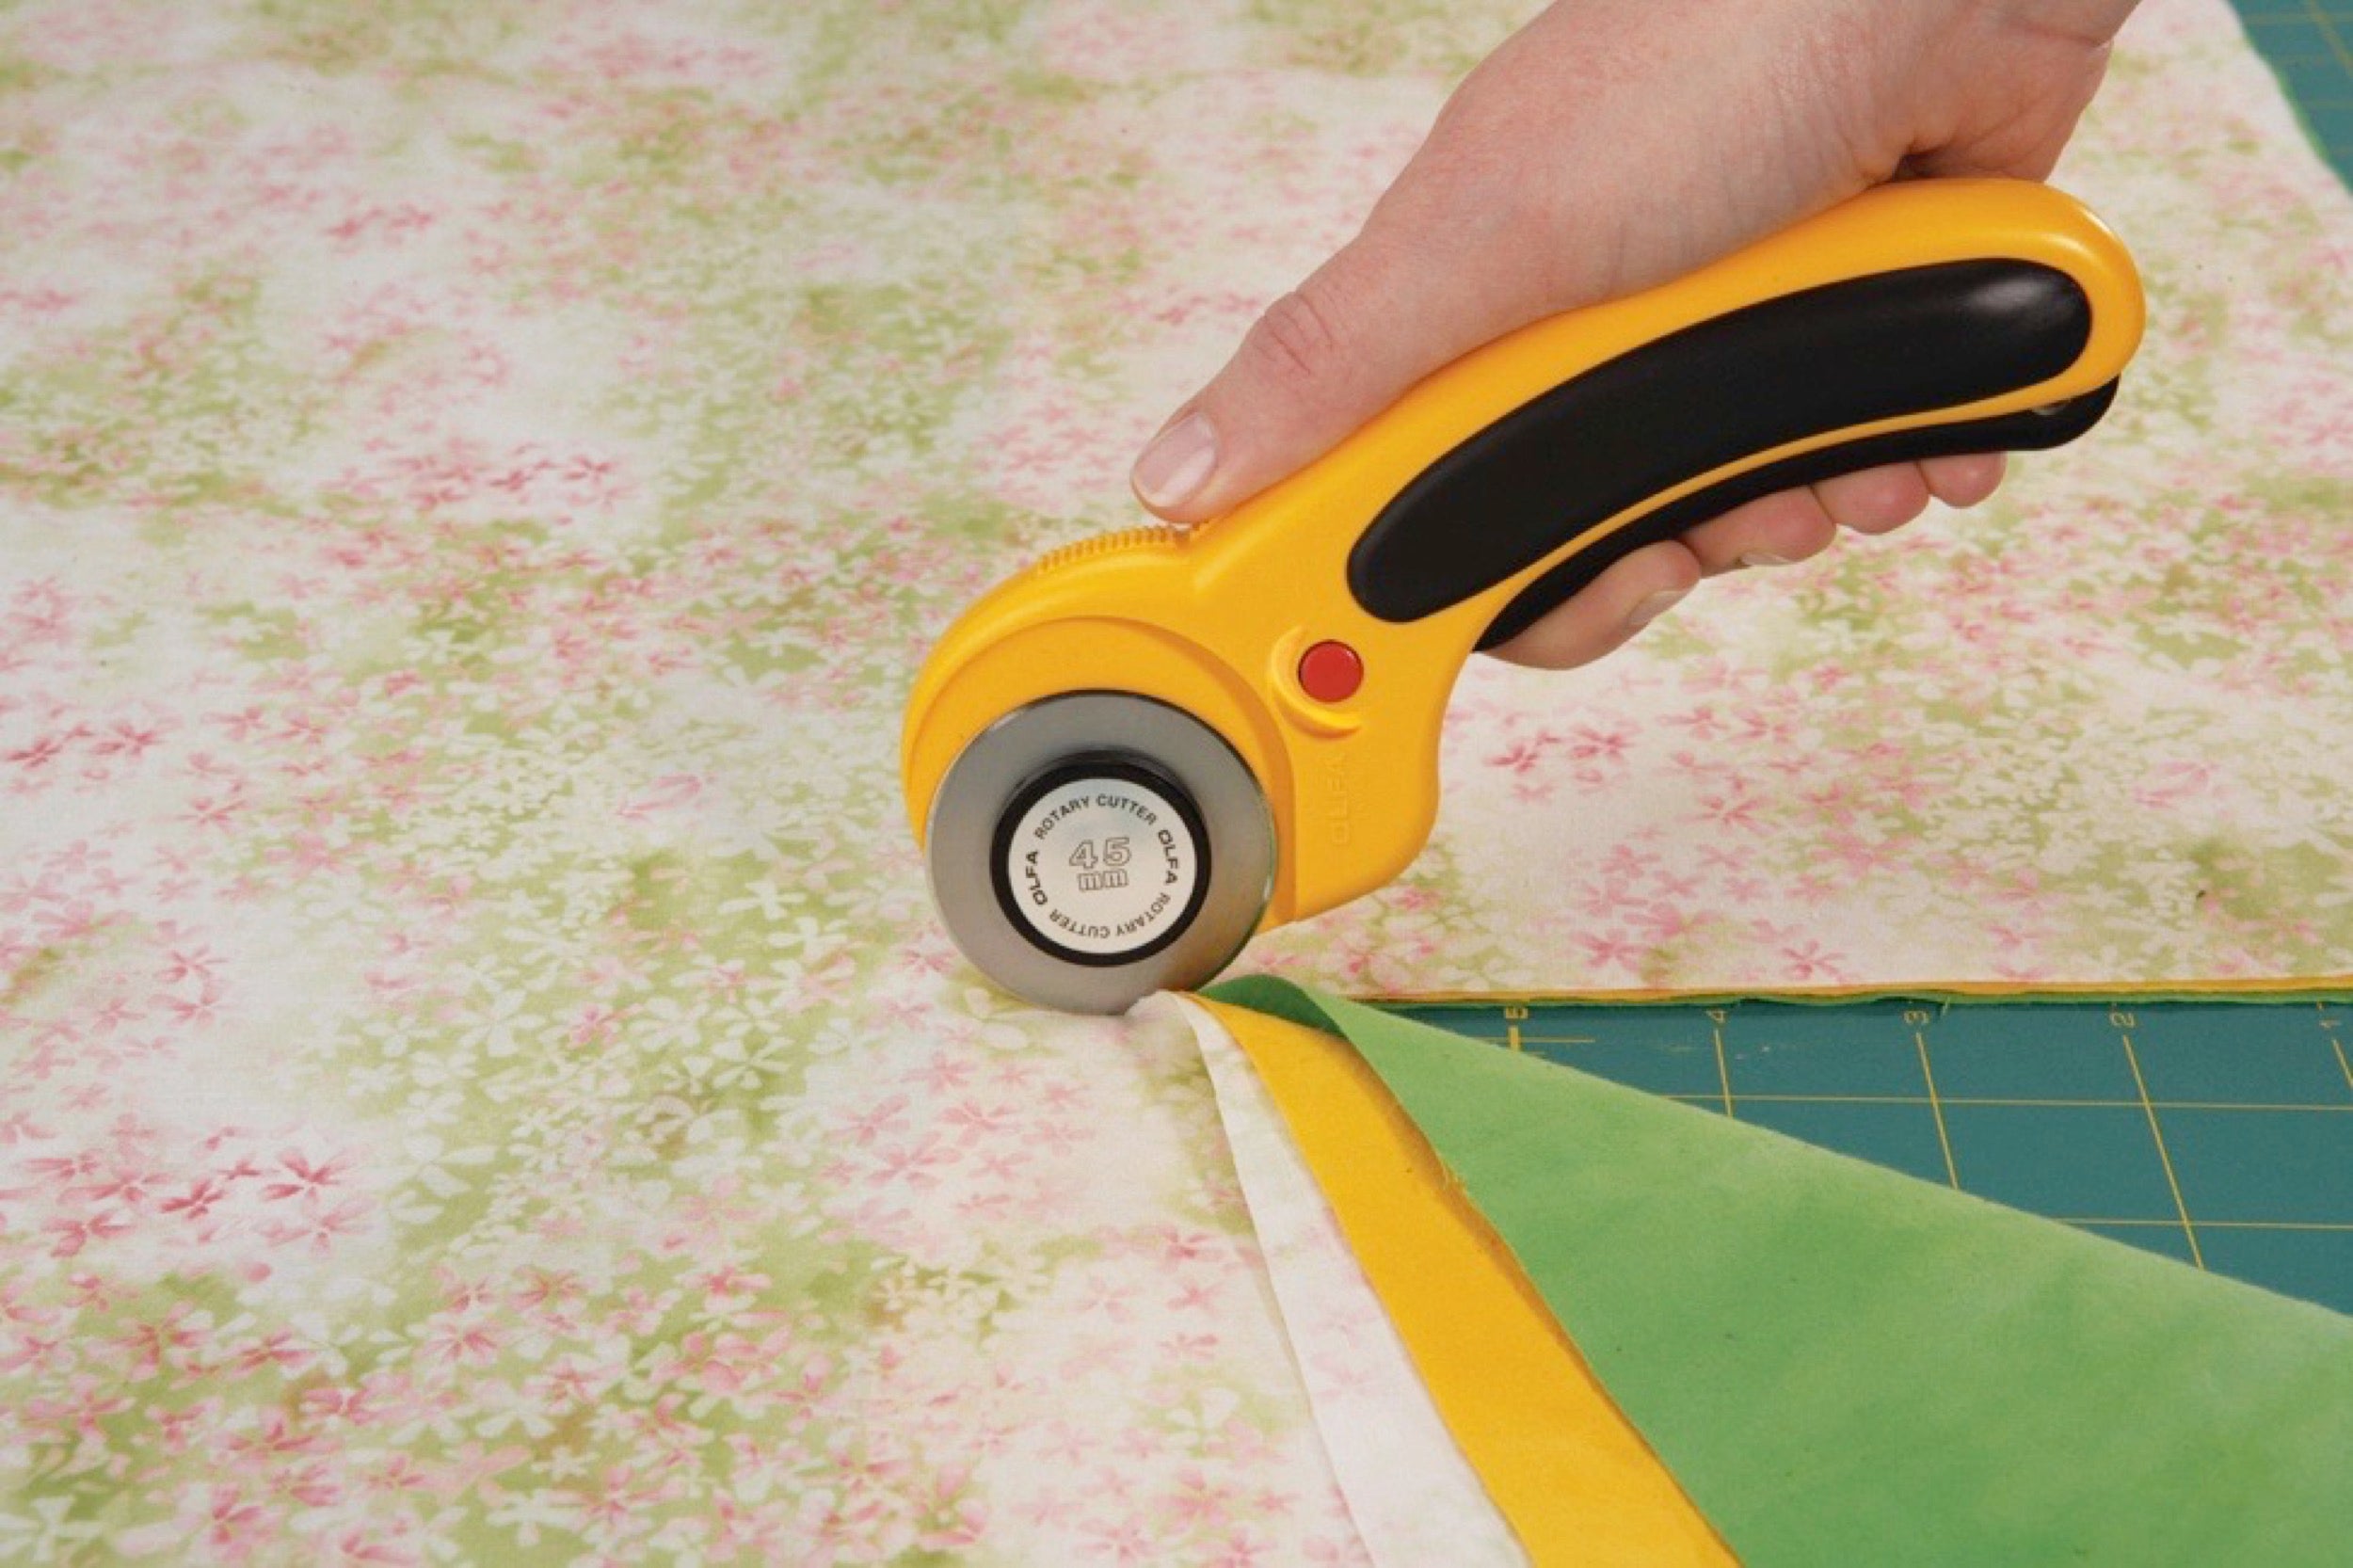 Photo of OLFA rotary cutter in deluxe ergonomic 45mm size RTY-2/DX